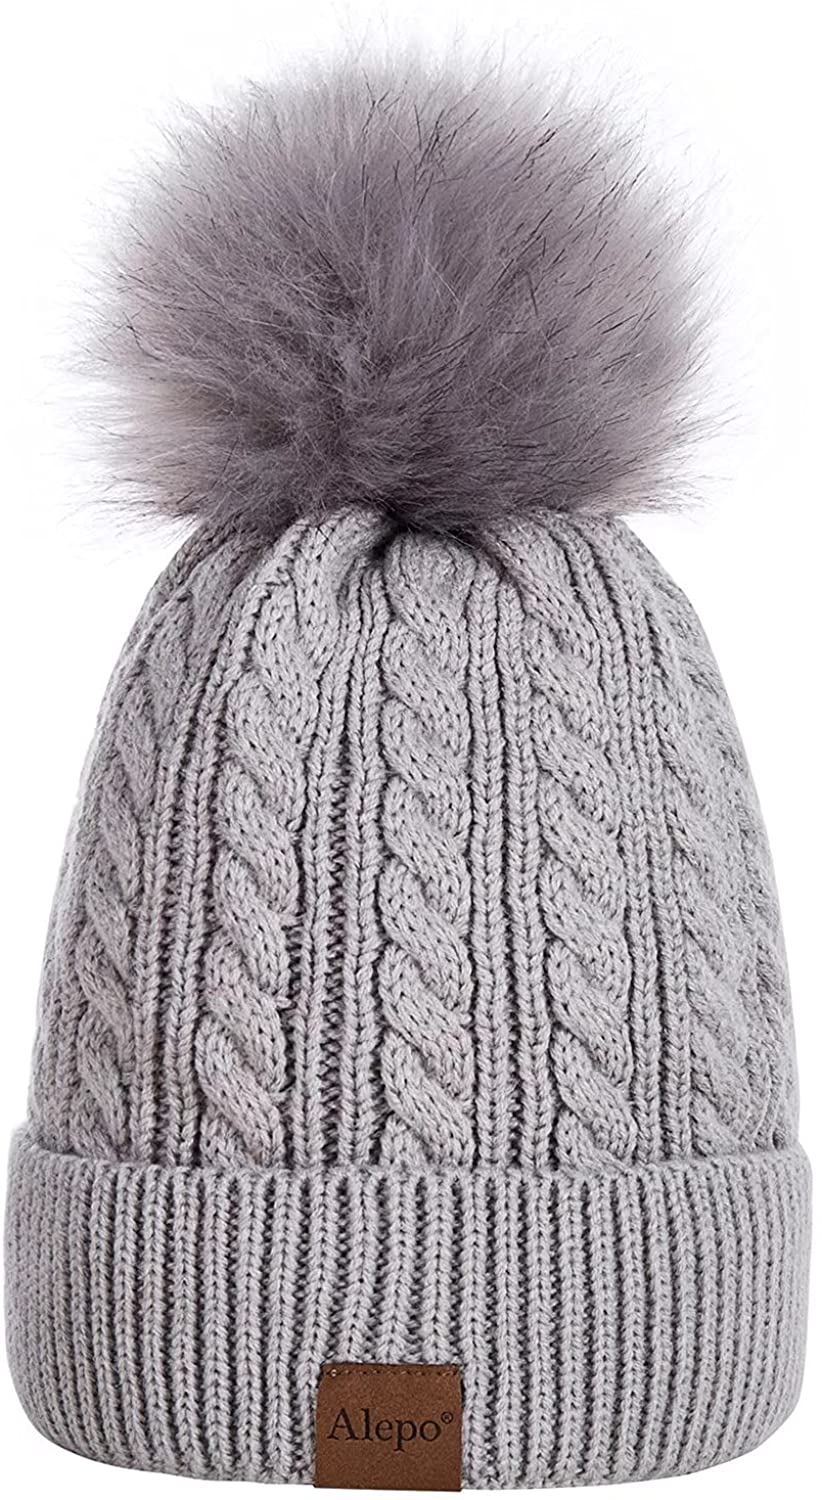 Warm Fleece Lined Knitted Soft Ski Cuff Cap with Alepo Womens Winter Beanie Hat 